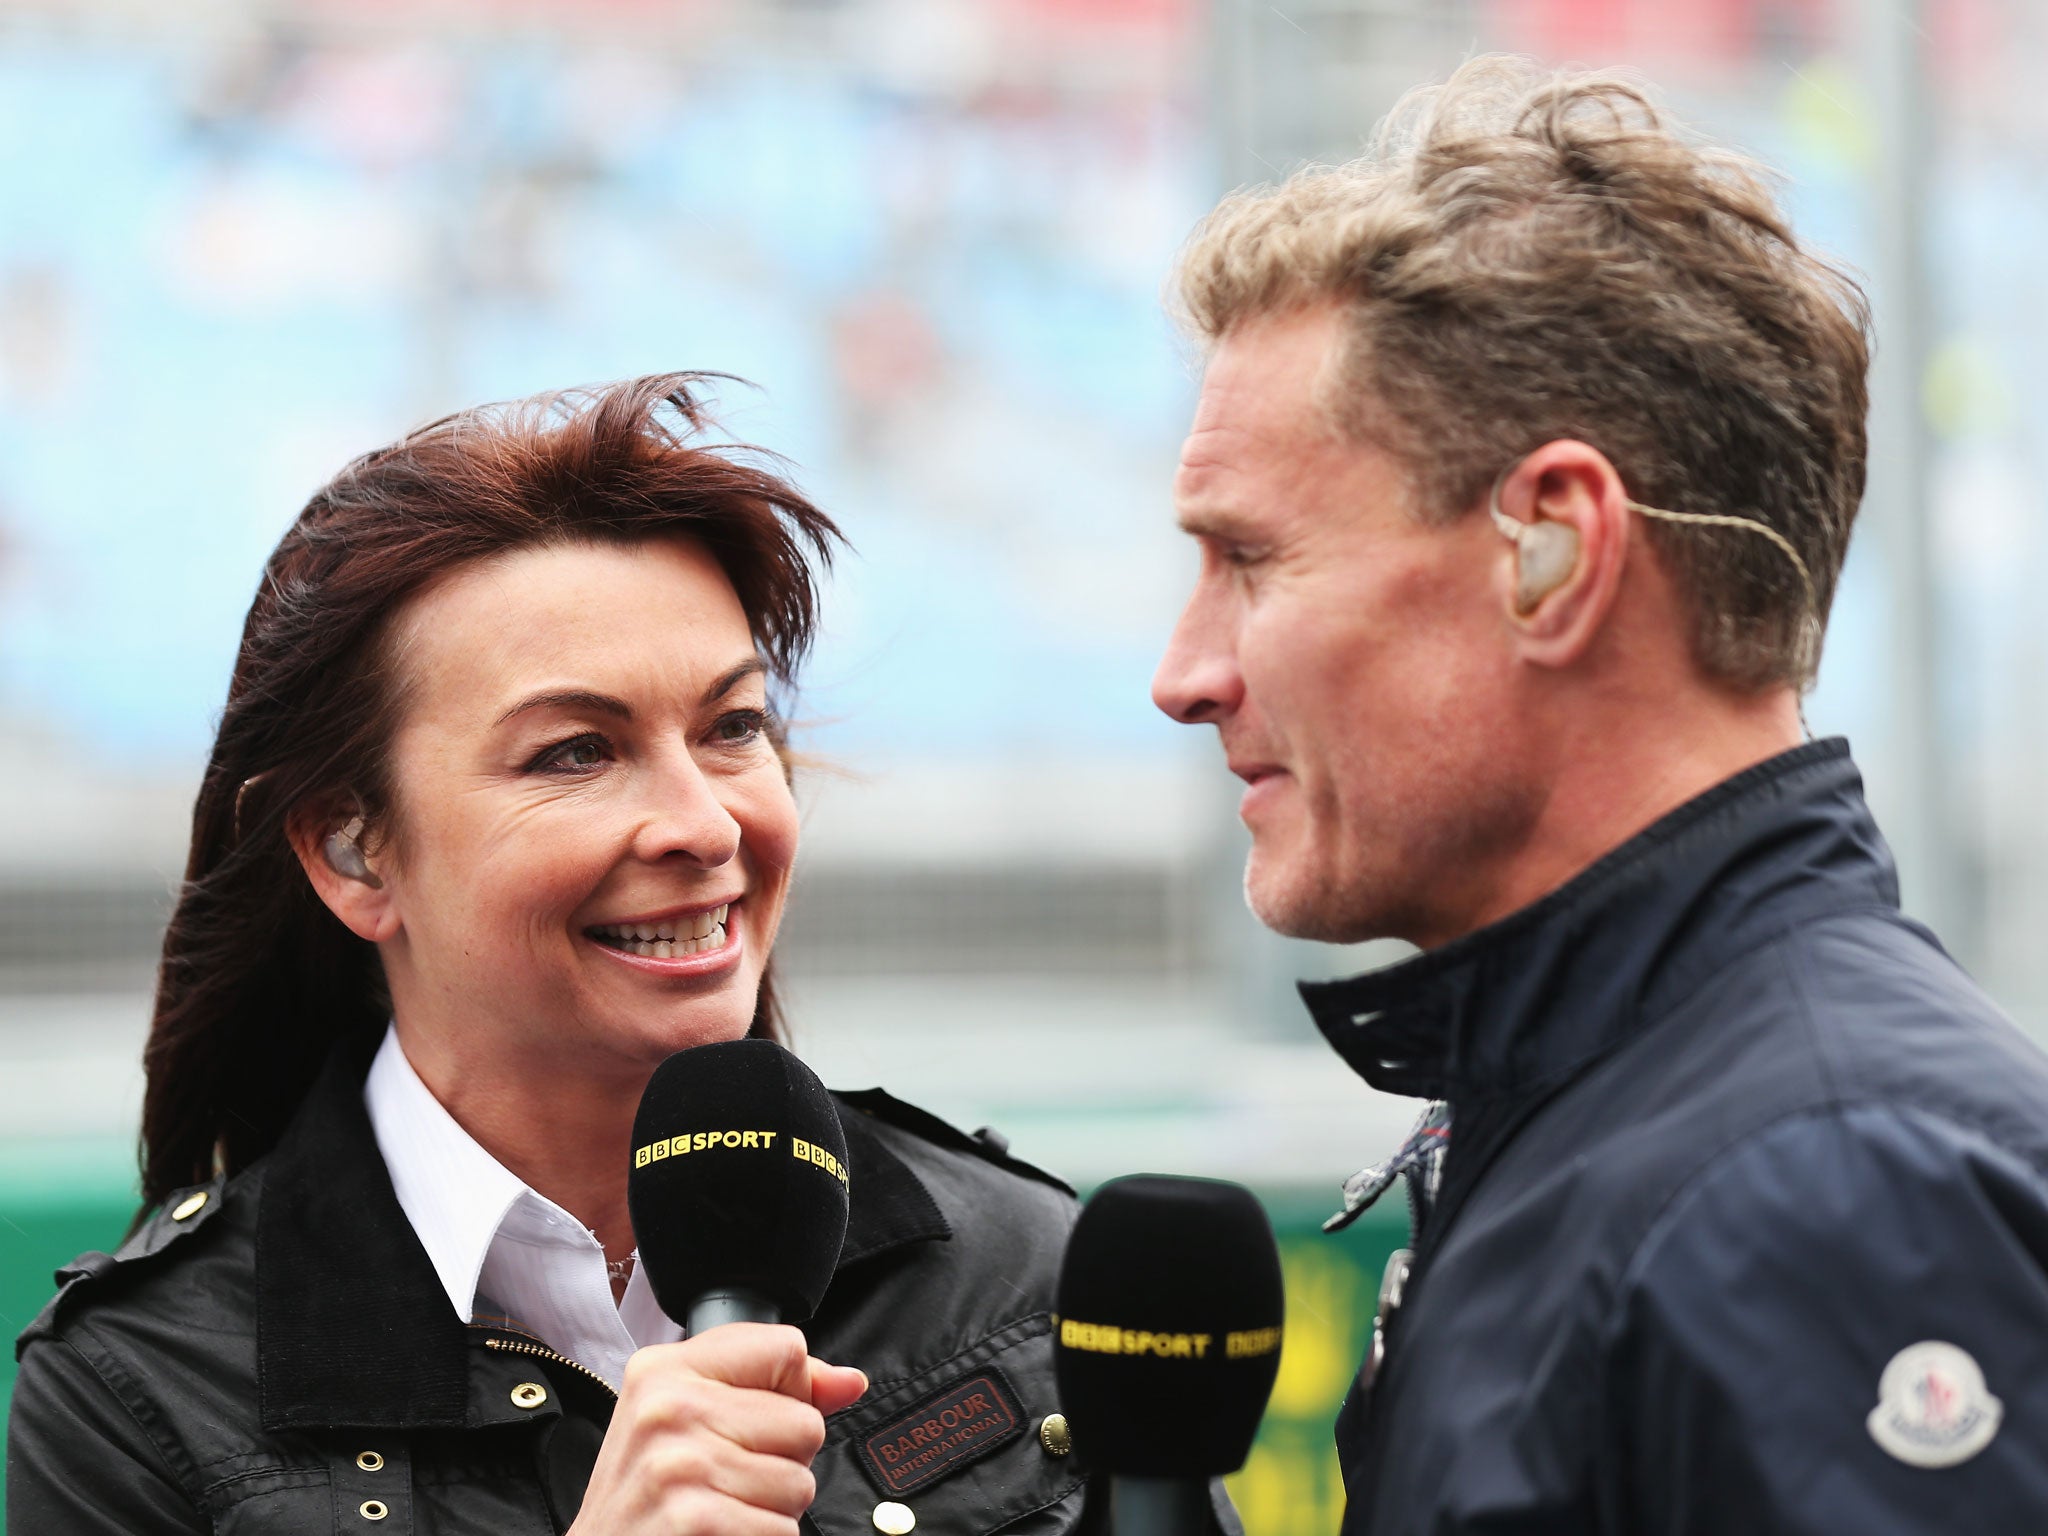 BBC F1 presenter Suzi Perry, left, talks with former F1 driver David Coulthard, right, in the paddock